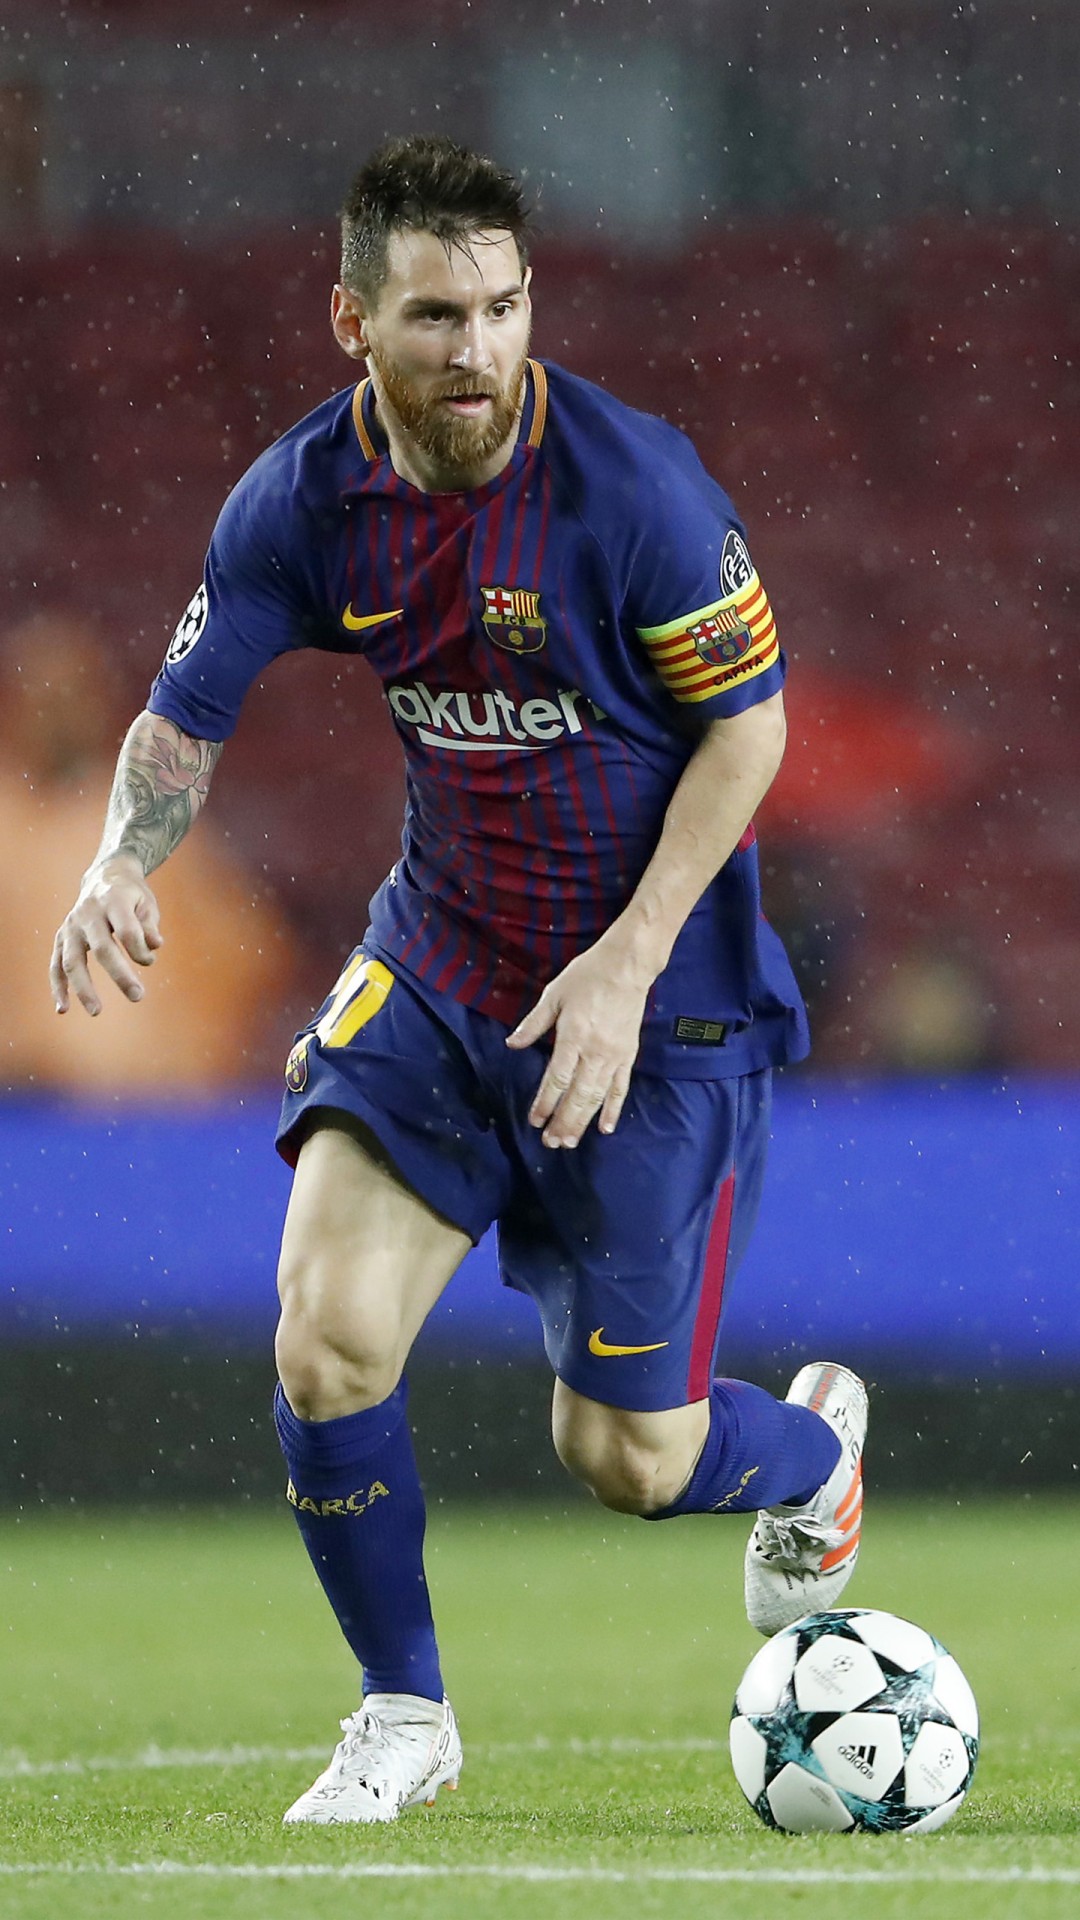 lionel messi iphone wallpaper,player,football player,soccer player,ball game,team sport